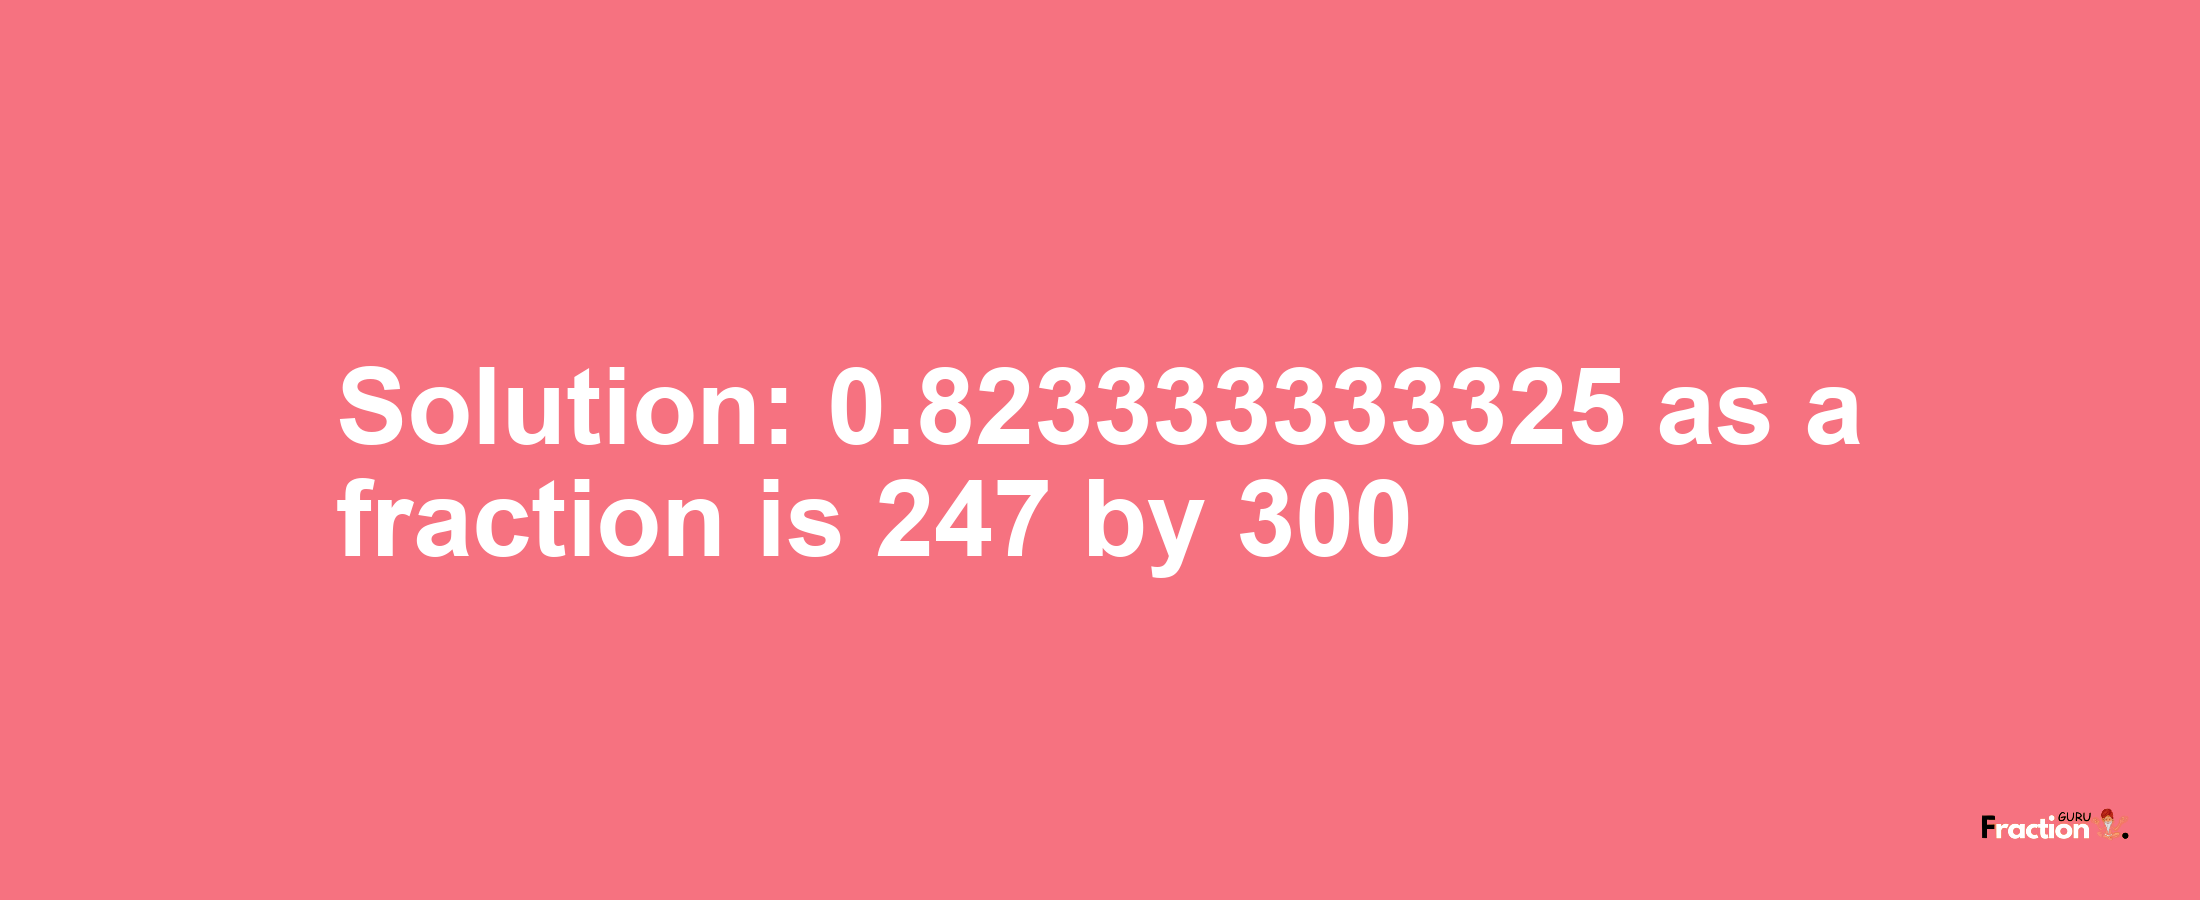 Solution:0.823333333325 as a fraction is 247/300